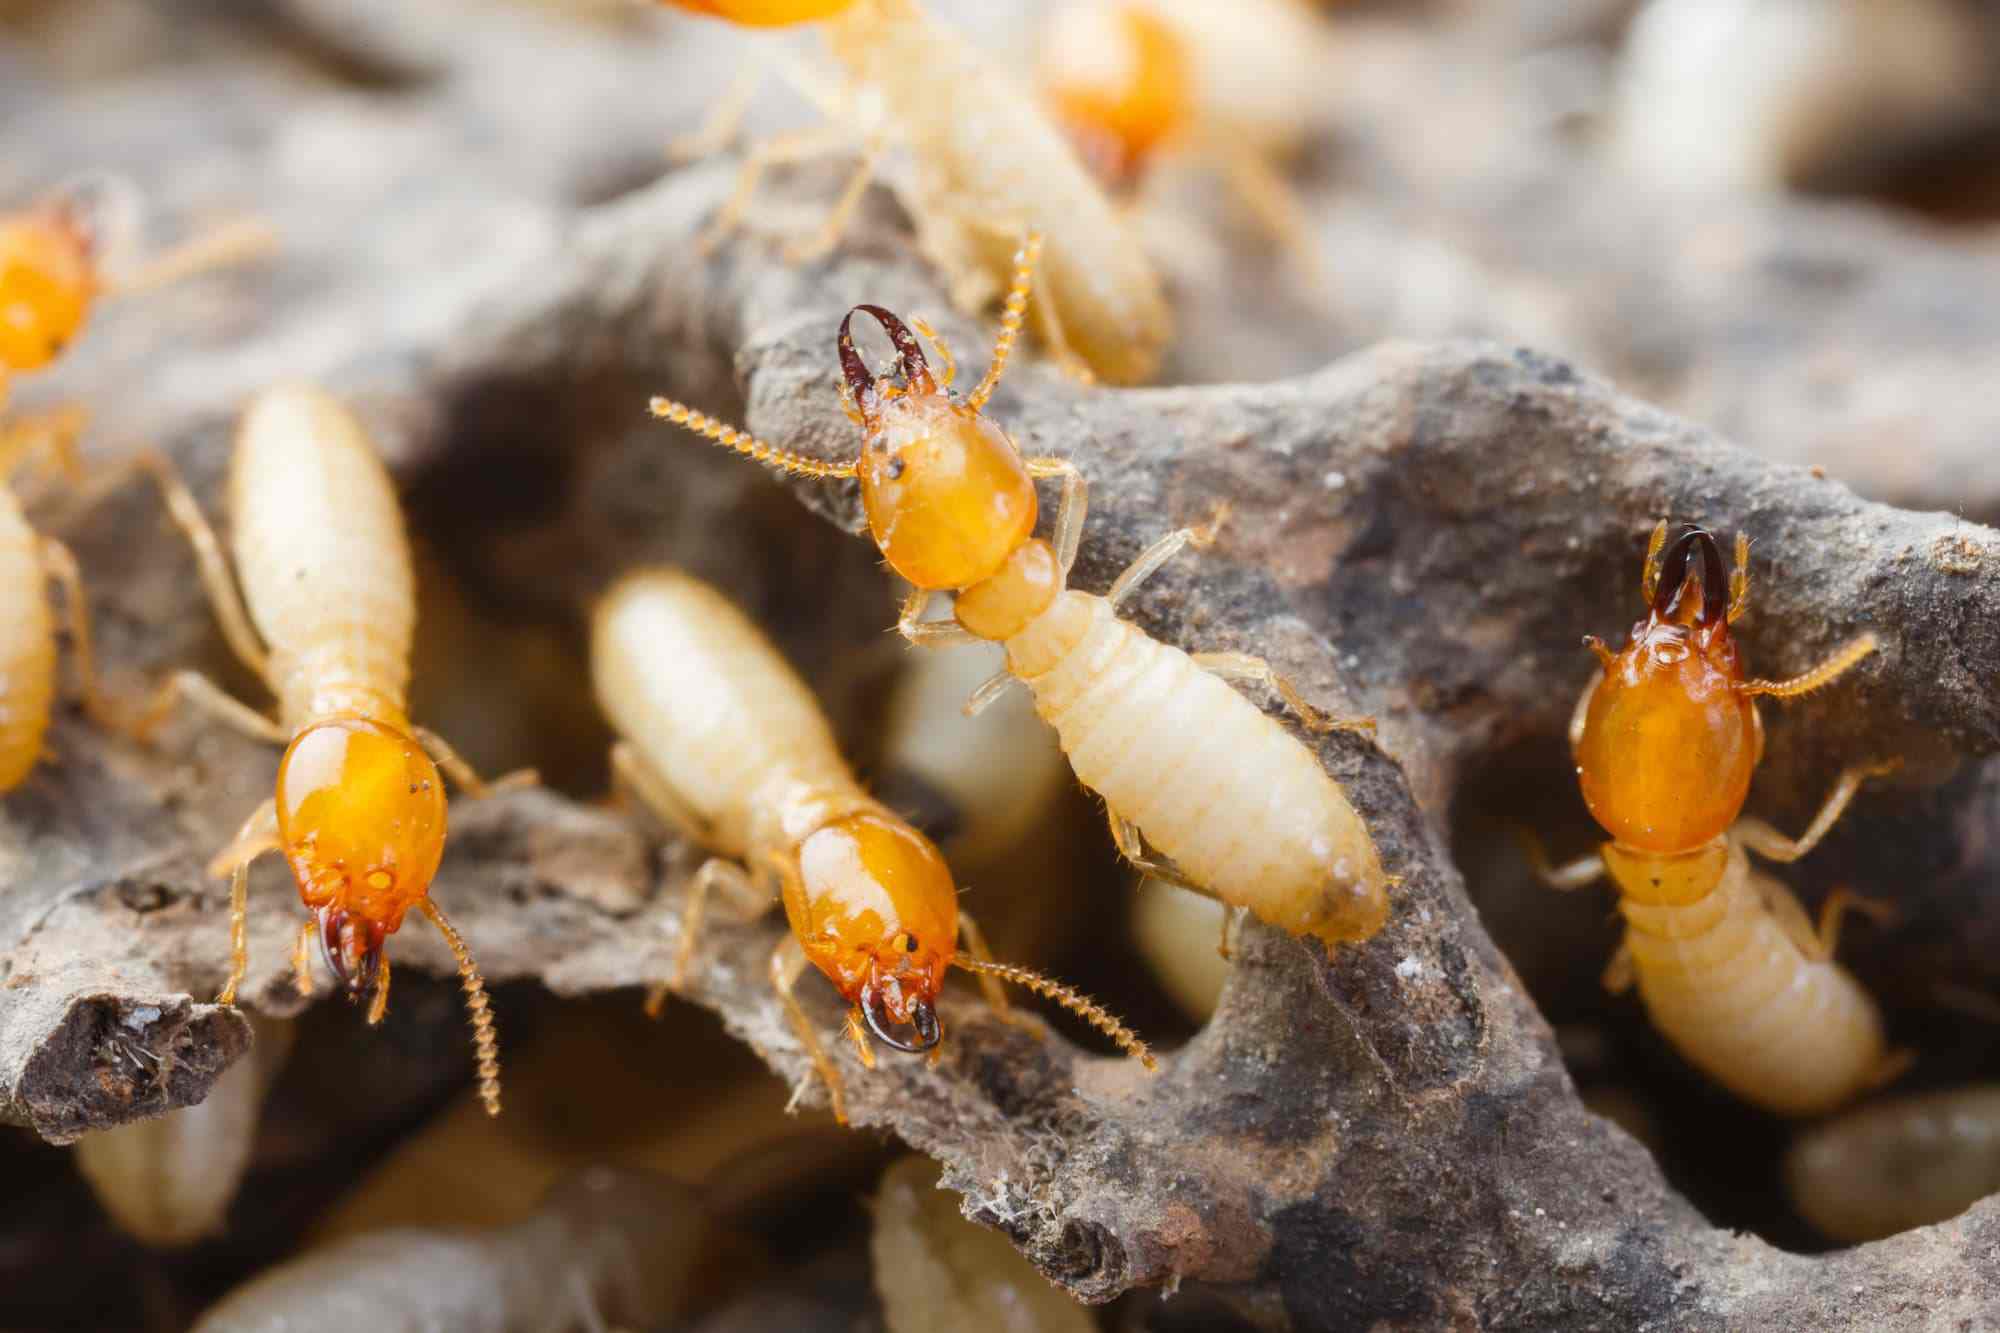 The Ultimate Technique To Eliminate Termites In Your Wall – Say Goodbye To Infestations!